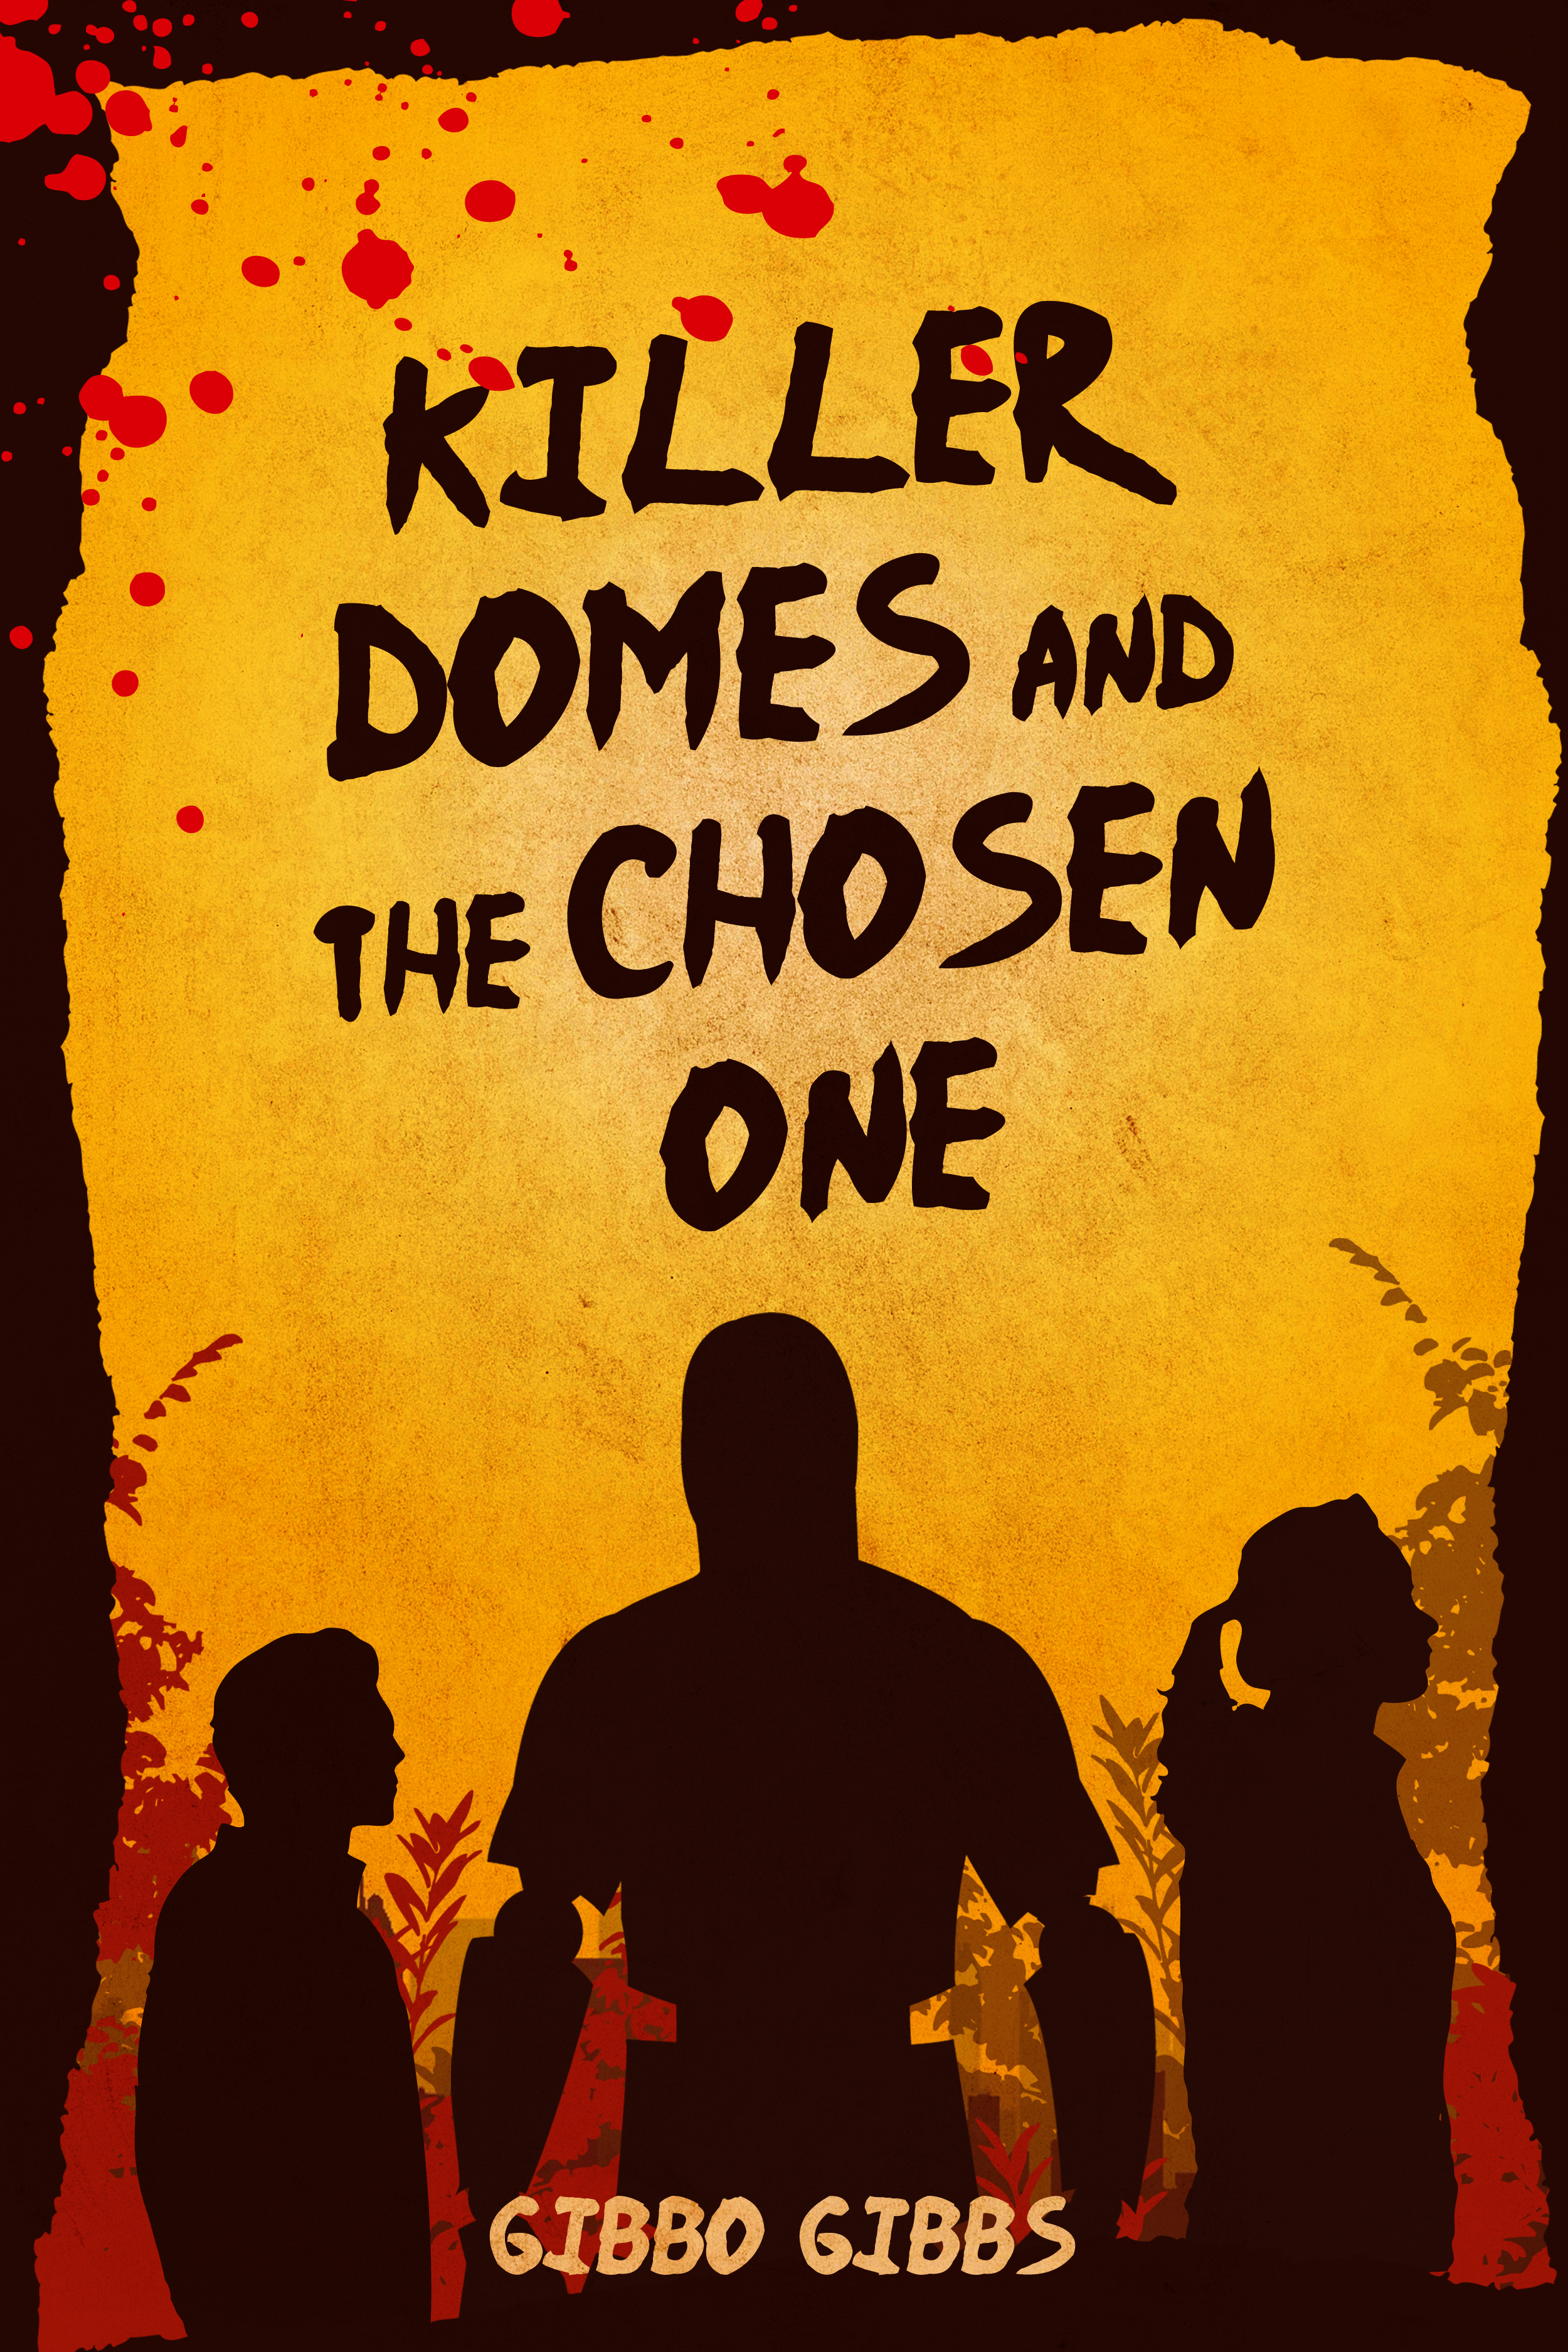 FREE: Killer Domes and the Chosen One by Gibbo Gibbs